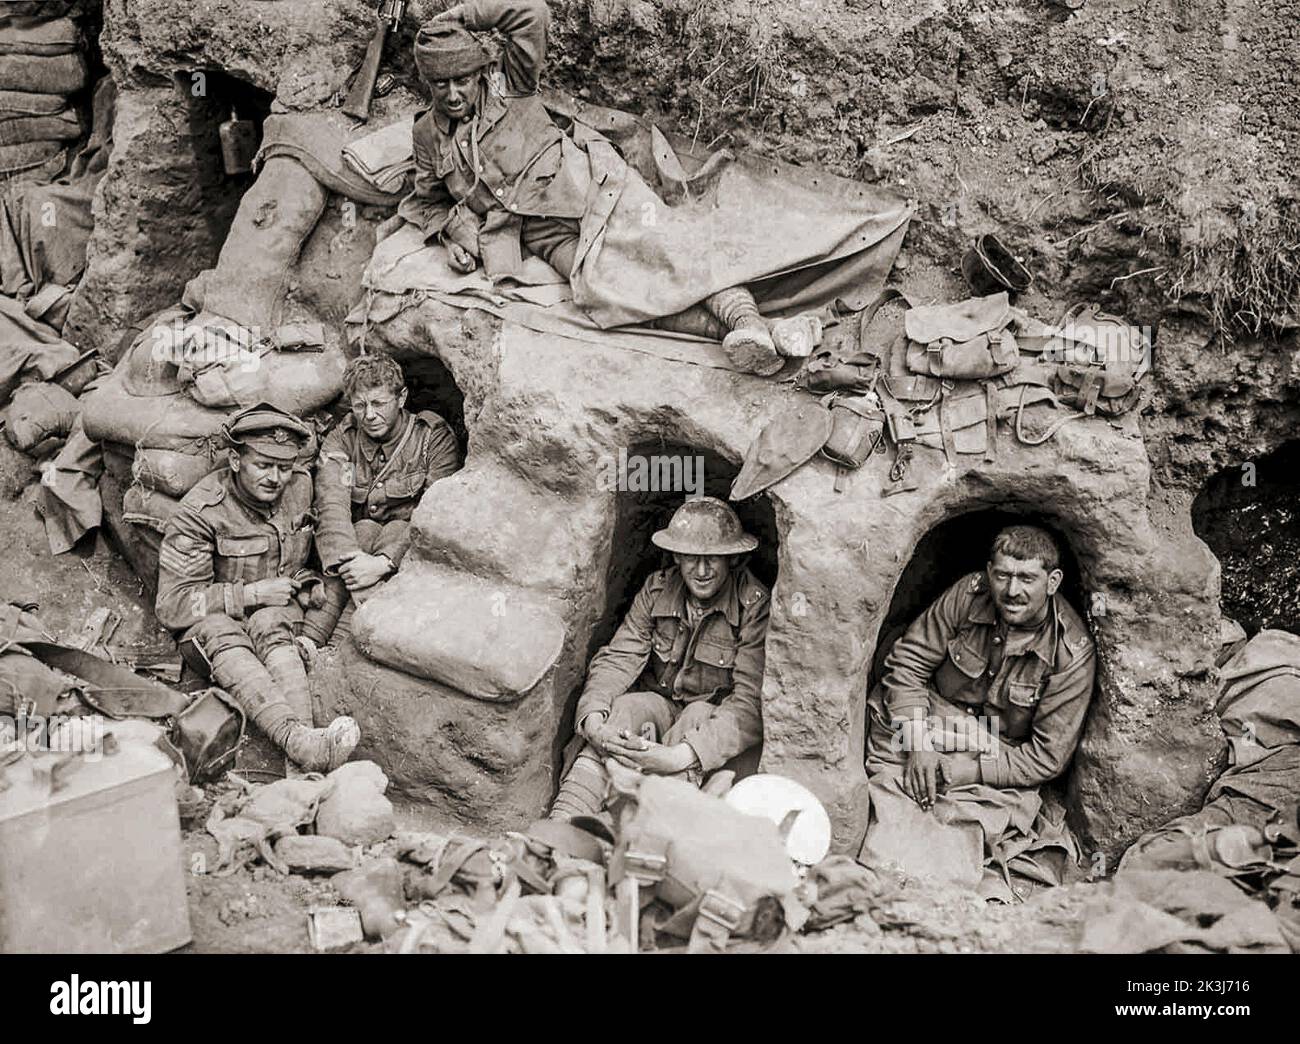 Men of the Border Regiment rest in shallow dugouts near Thiepval Wood. The Battle of Thiepval Ridge was the first large offensive of the Reserve Army under Lieutenant General Hubert Gough, during the Battle of the Somme on the Western Front during the First World War. Stock Photo